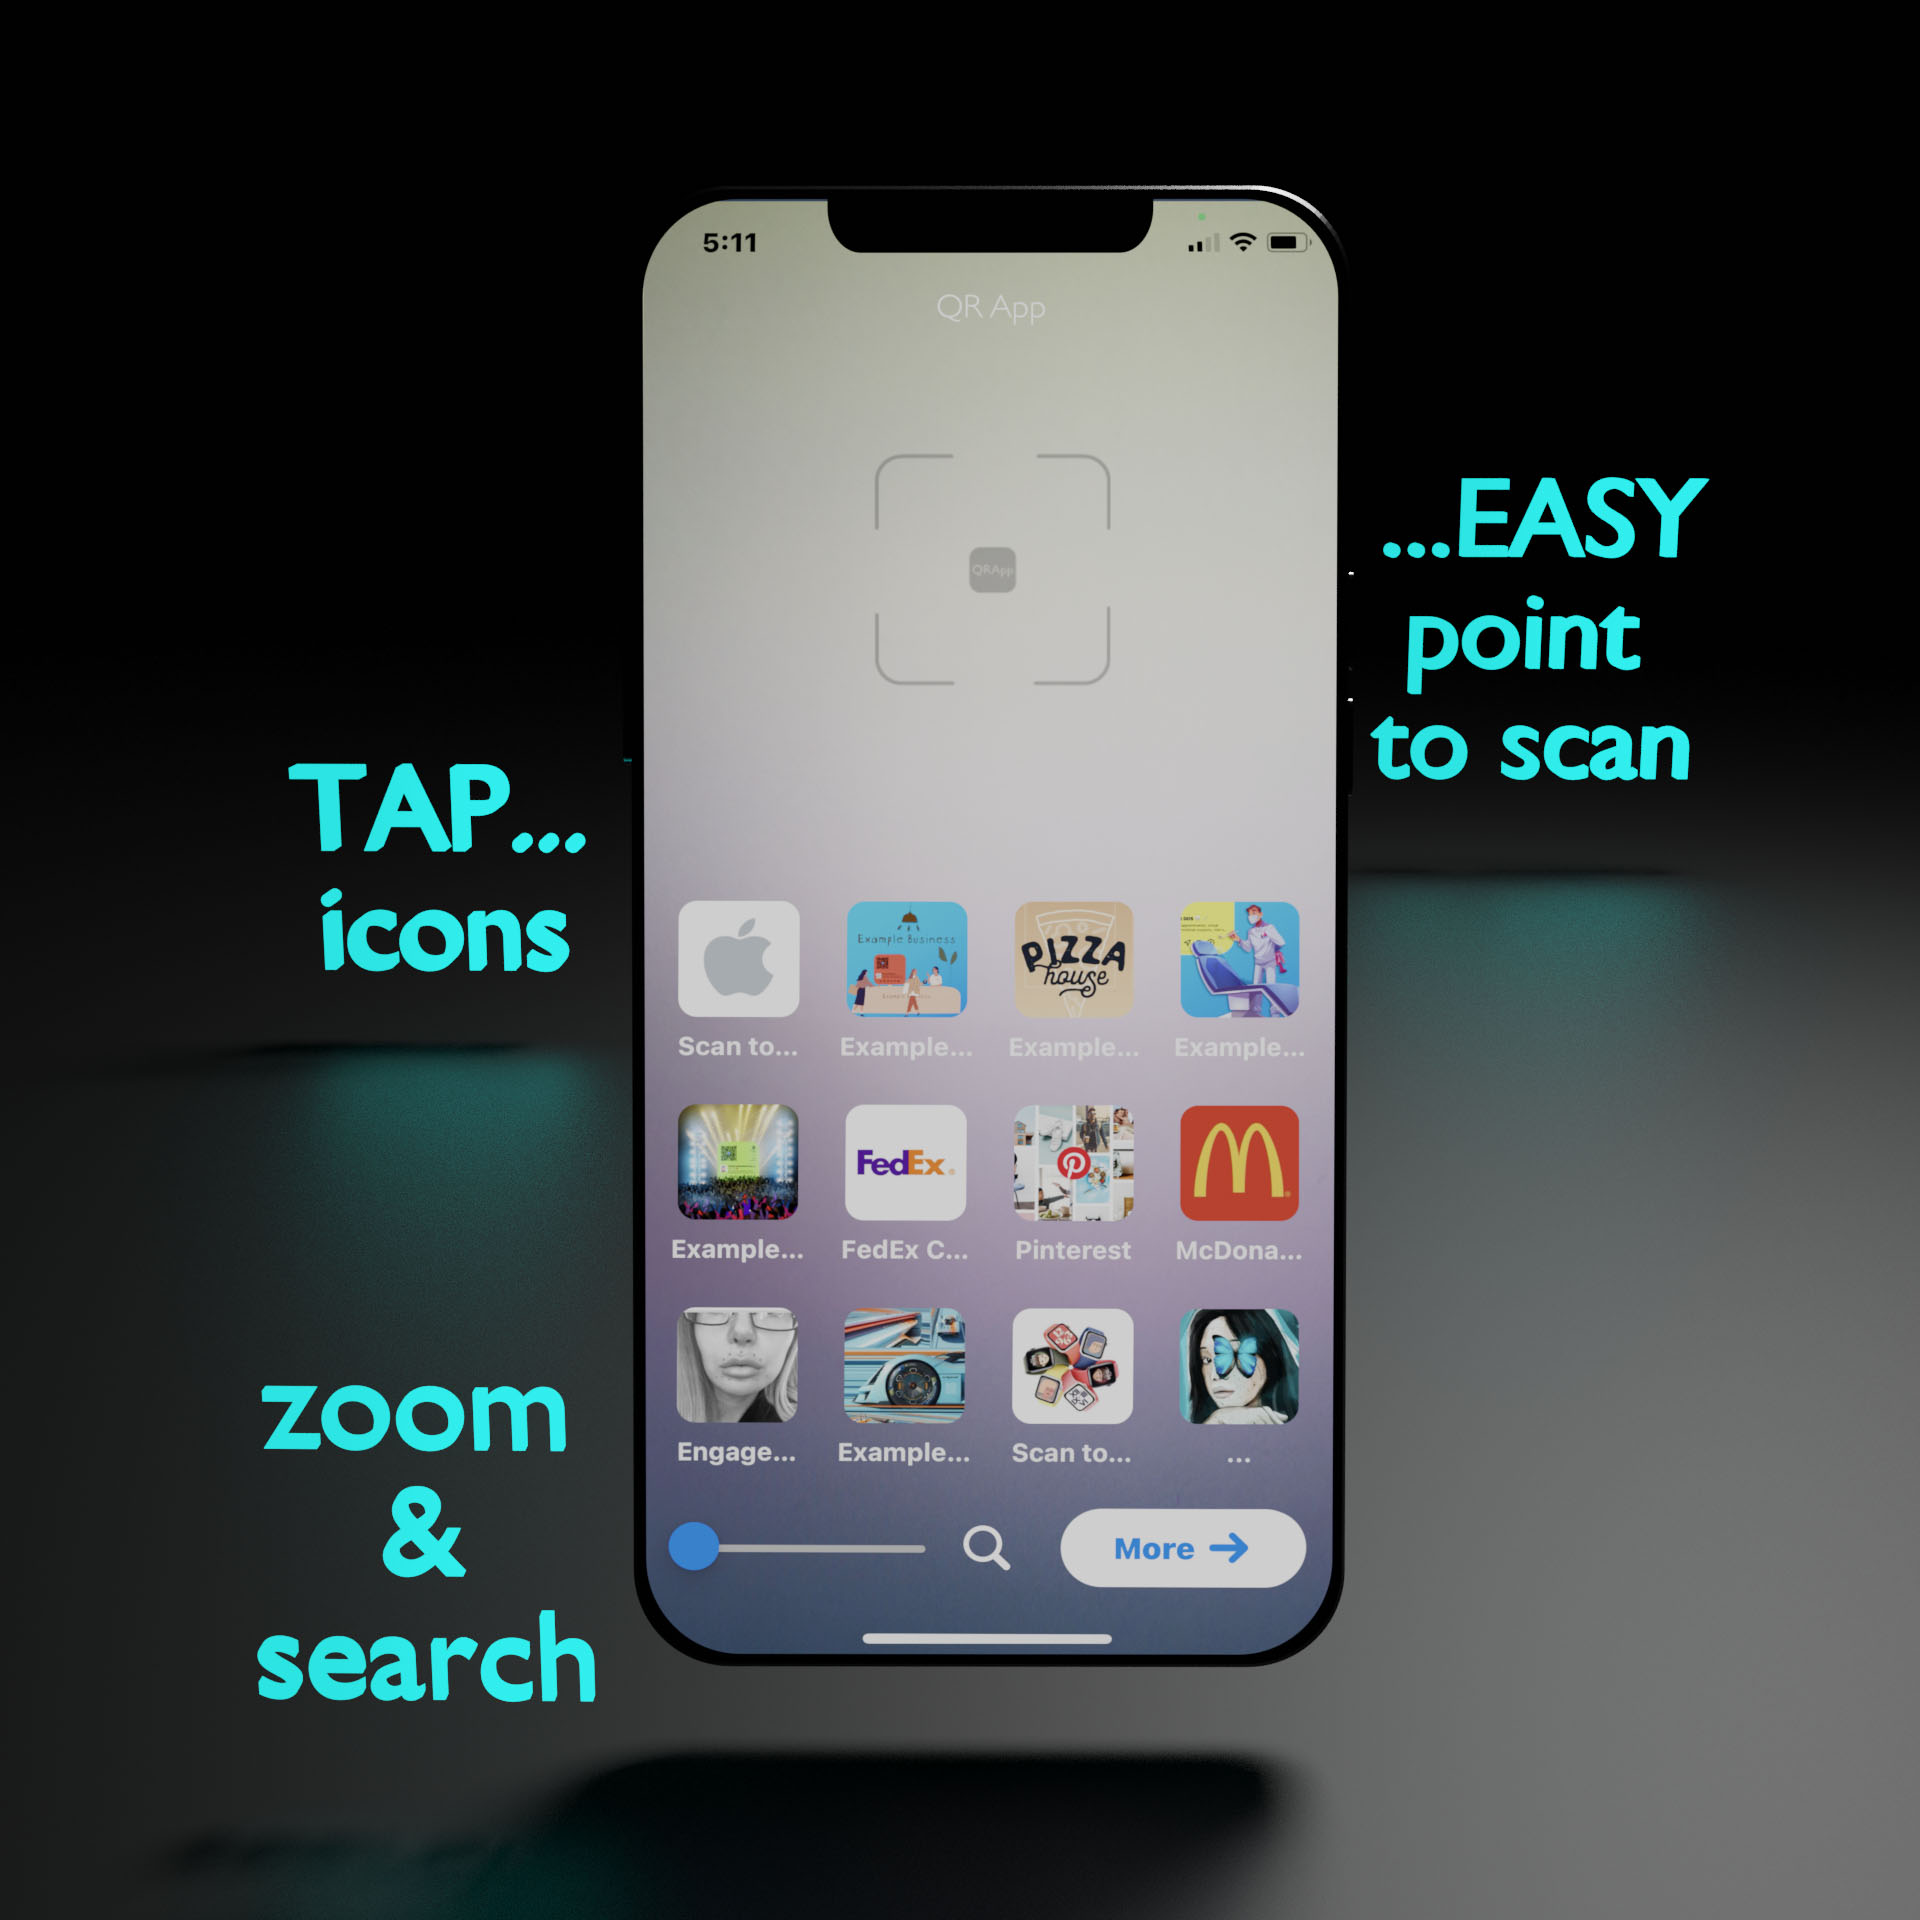 Powerful features such as 10x zoom capabilities, search and QR icons, makes the QRApp QR Code scanner the best choice for 2021